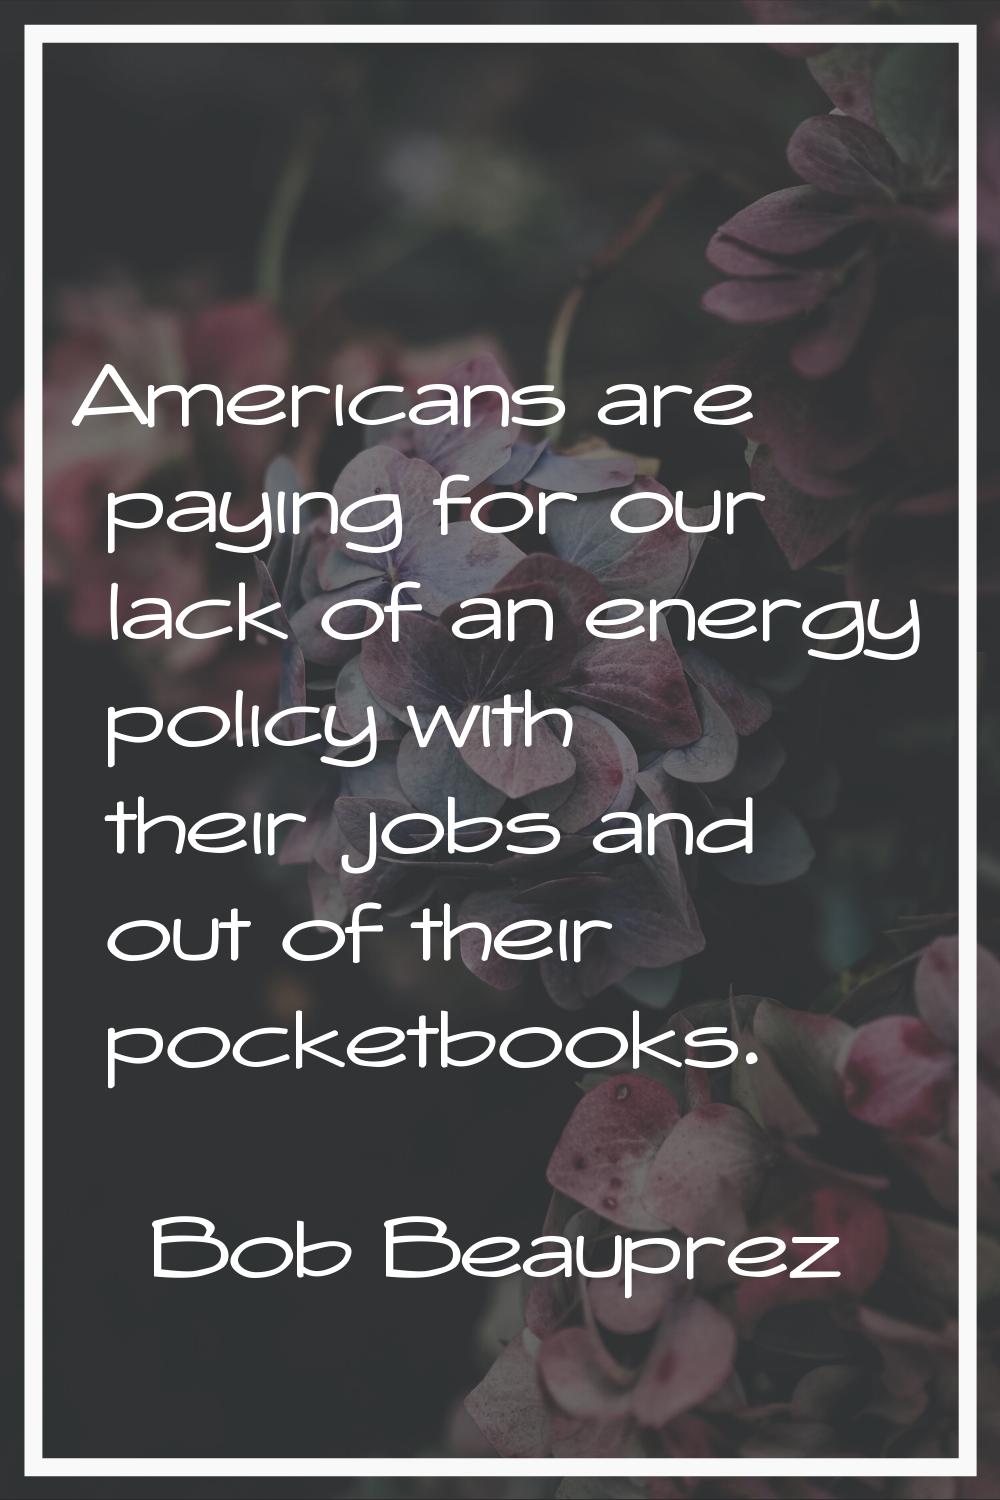 Americans are paying for our lack of an energy policy with their jobs and out of their pocketbooks.